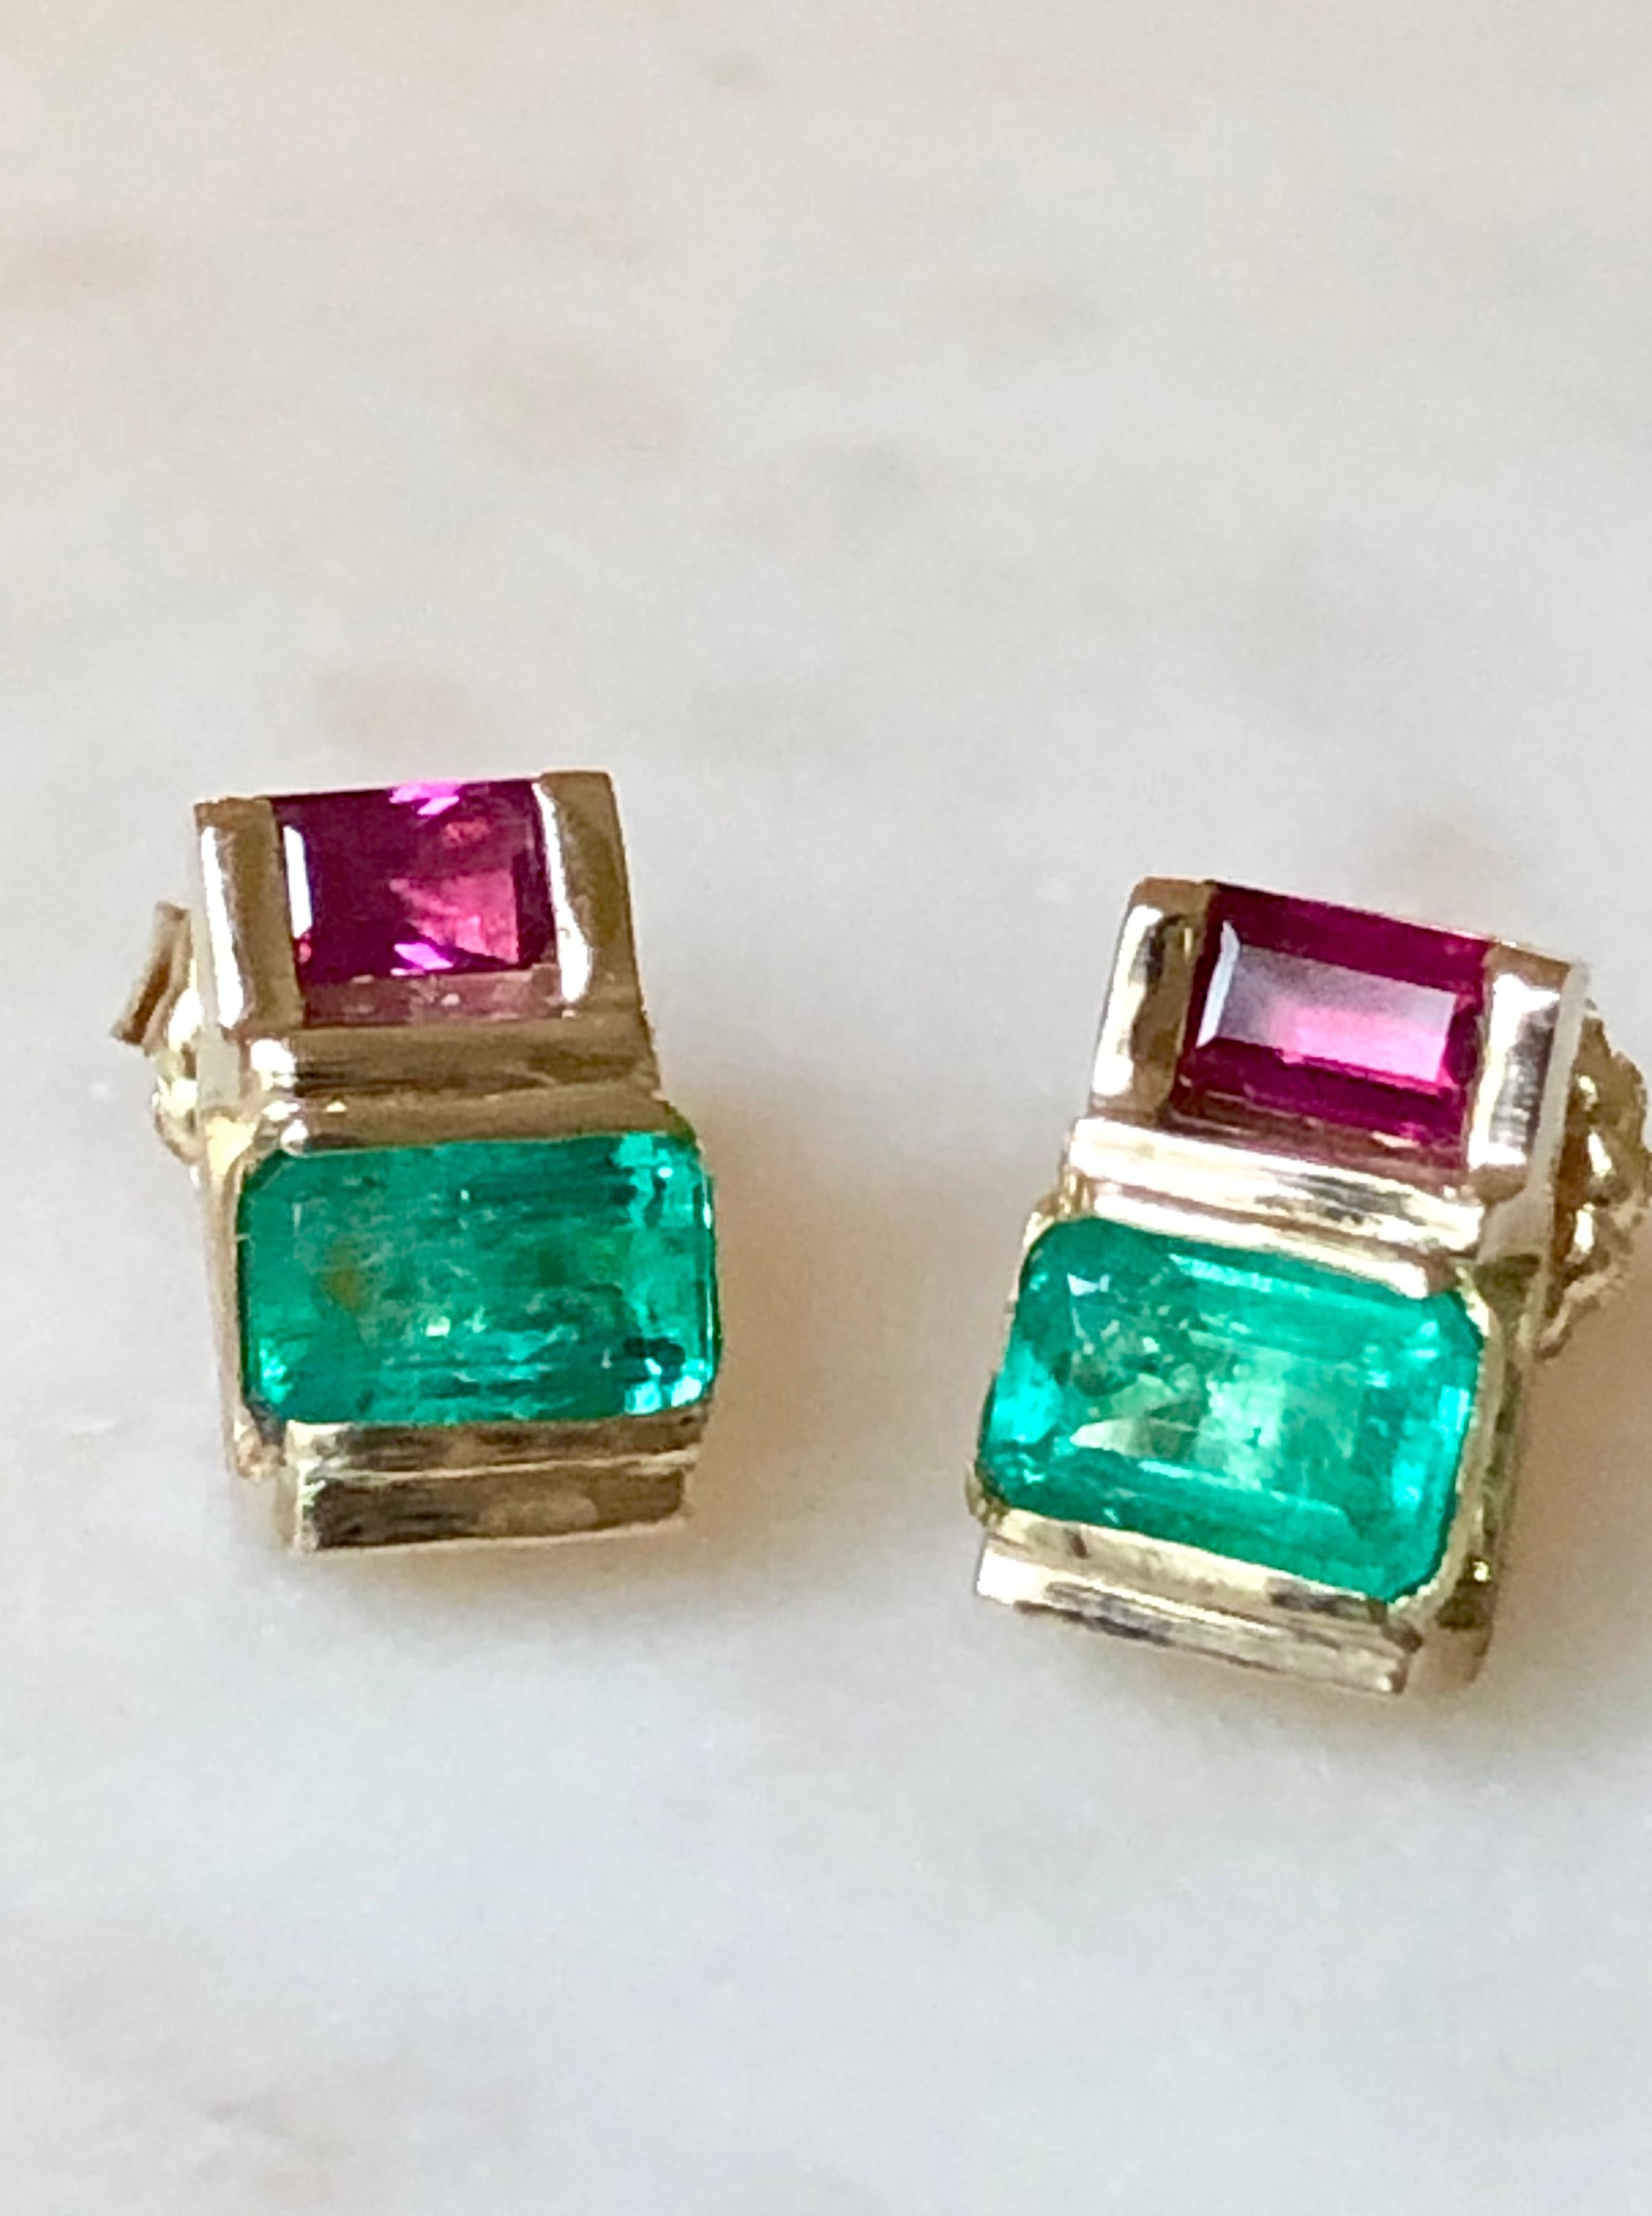 This elegant and contemporary pair of Emerald Ruby stud earrings features:
Primary Stone: Natural Colombian Emerald
Shape or Cut: Emerald Cut
Emerald Weight: Over 2.00 Carat (2 emeralds)
Average Color/Clarity Emerald: Fine Medium Green/VS
Accent